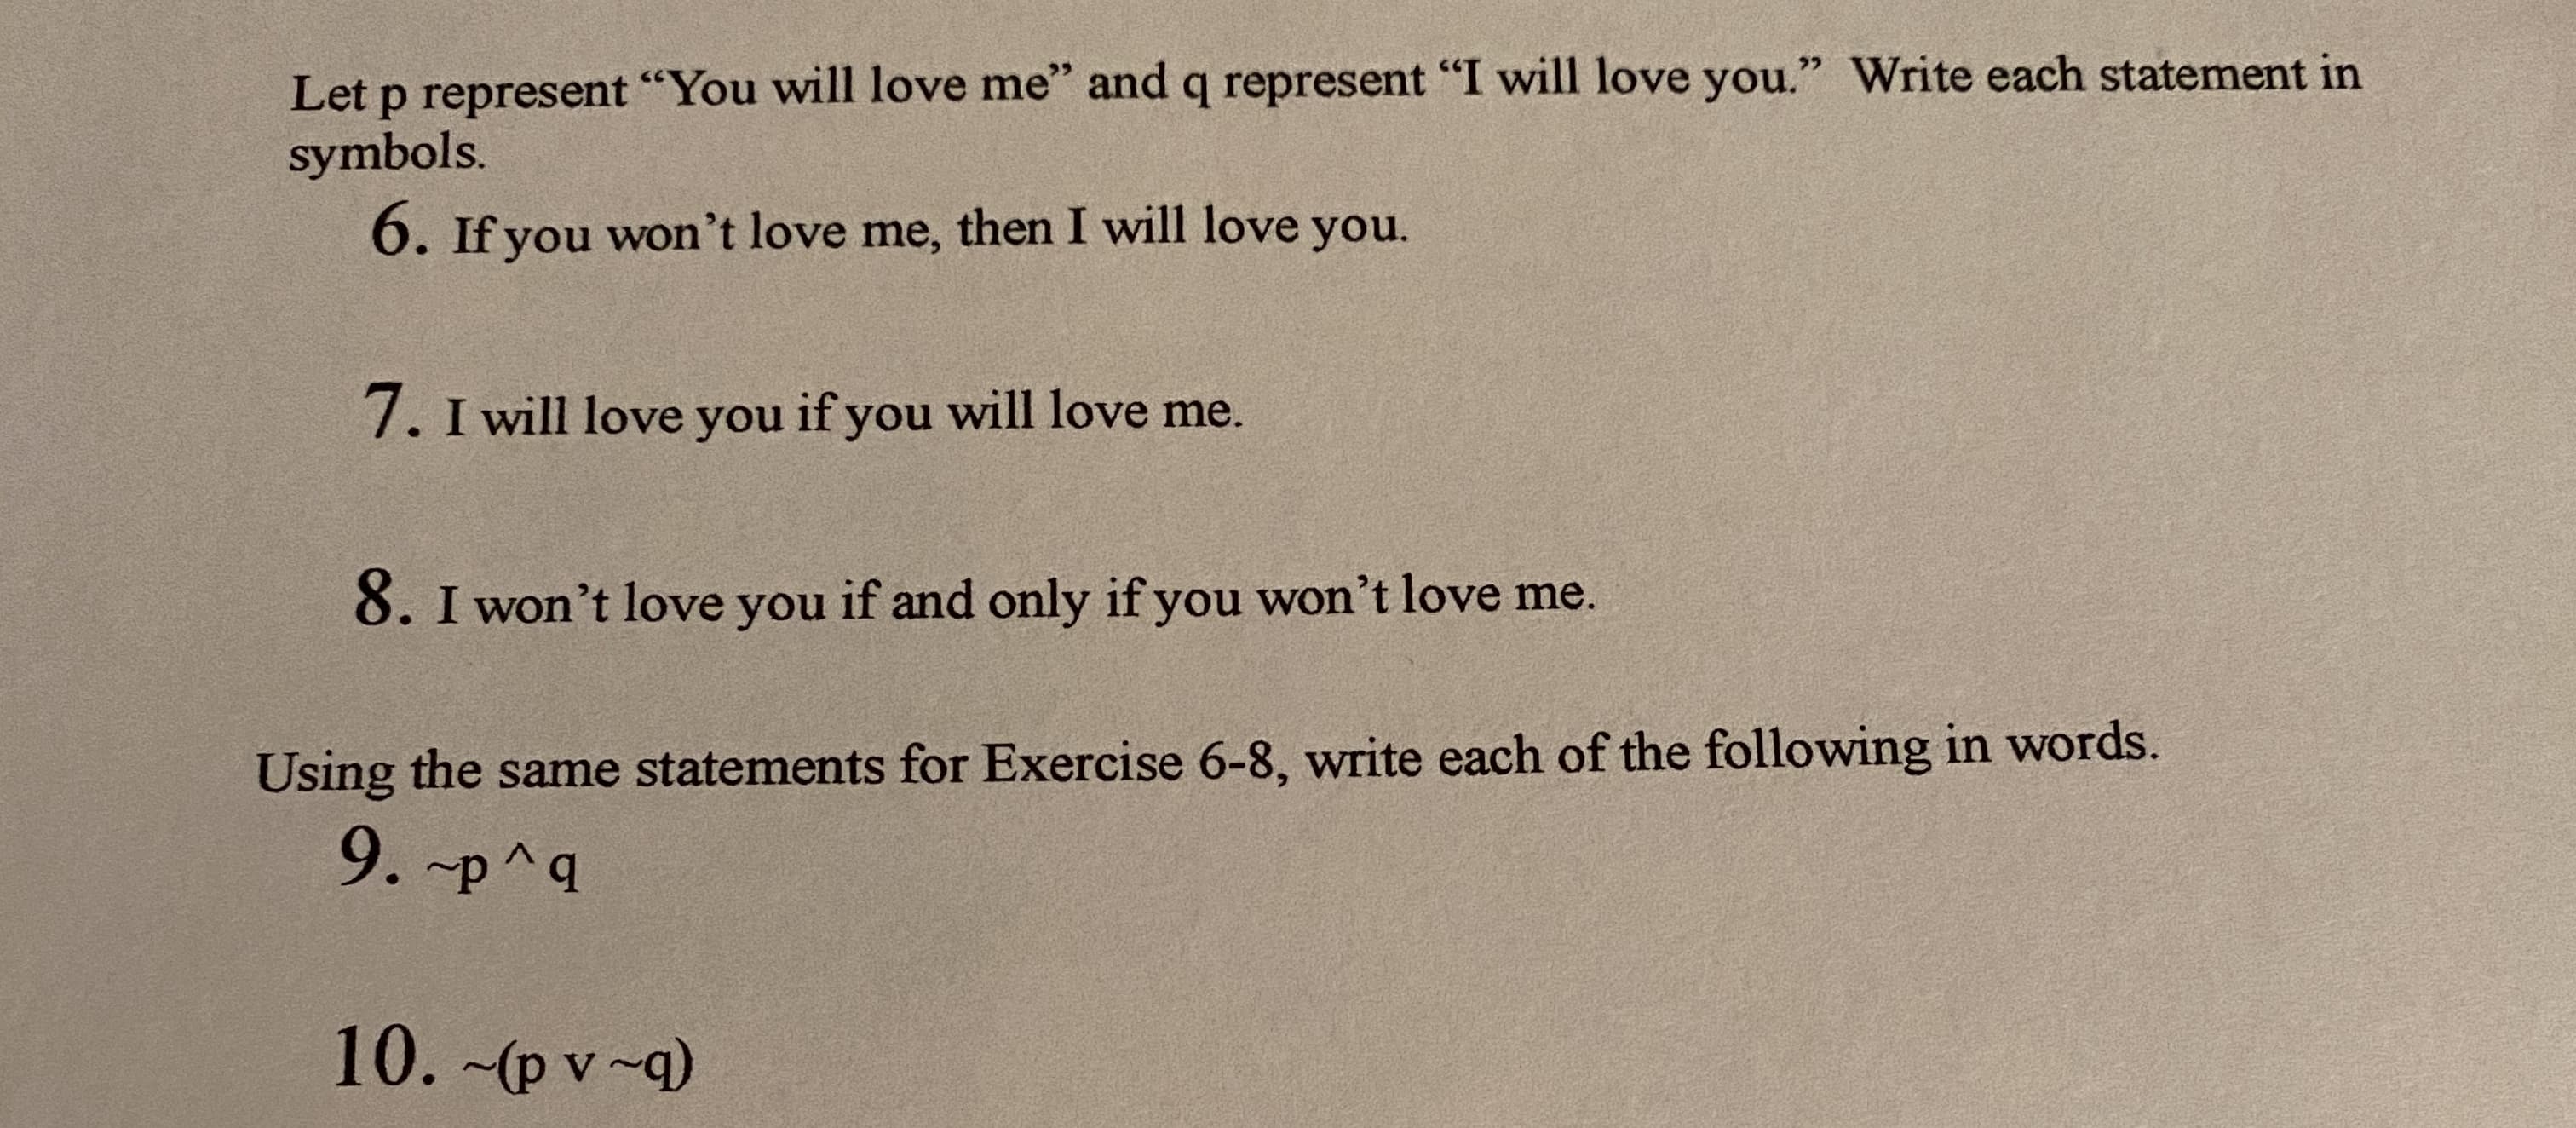 Let p represent "You will love me" and q represent "I will love you." Write each statement in
symbols.
6. If you won't love me, then I will love you.
7. I will love you if you will love me.
8. I won't love you if and only if you won't love me.
